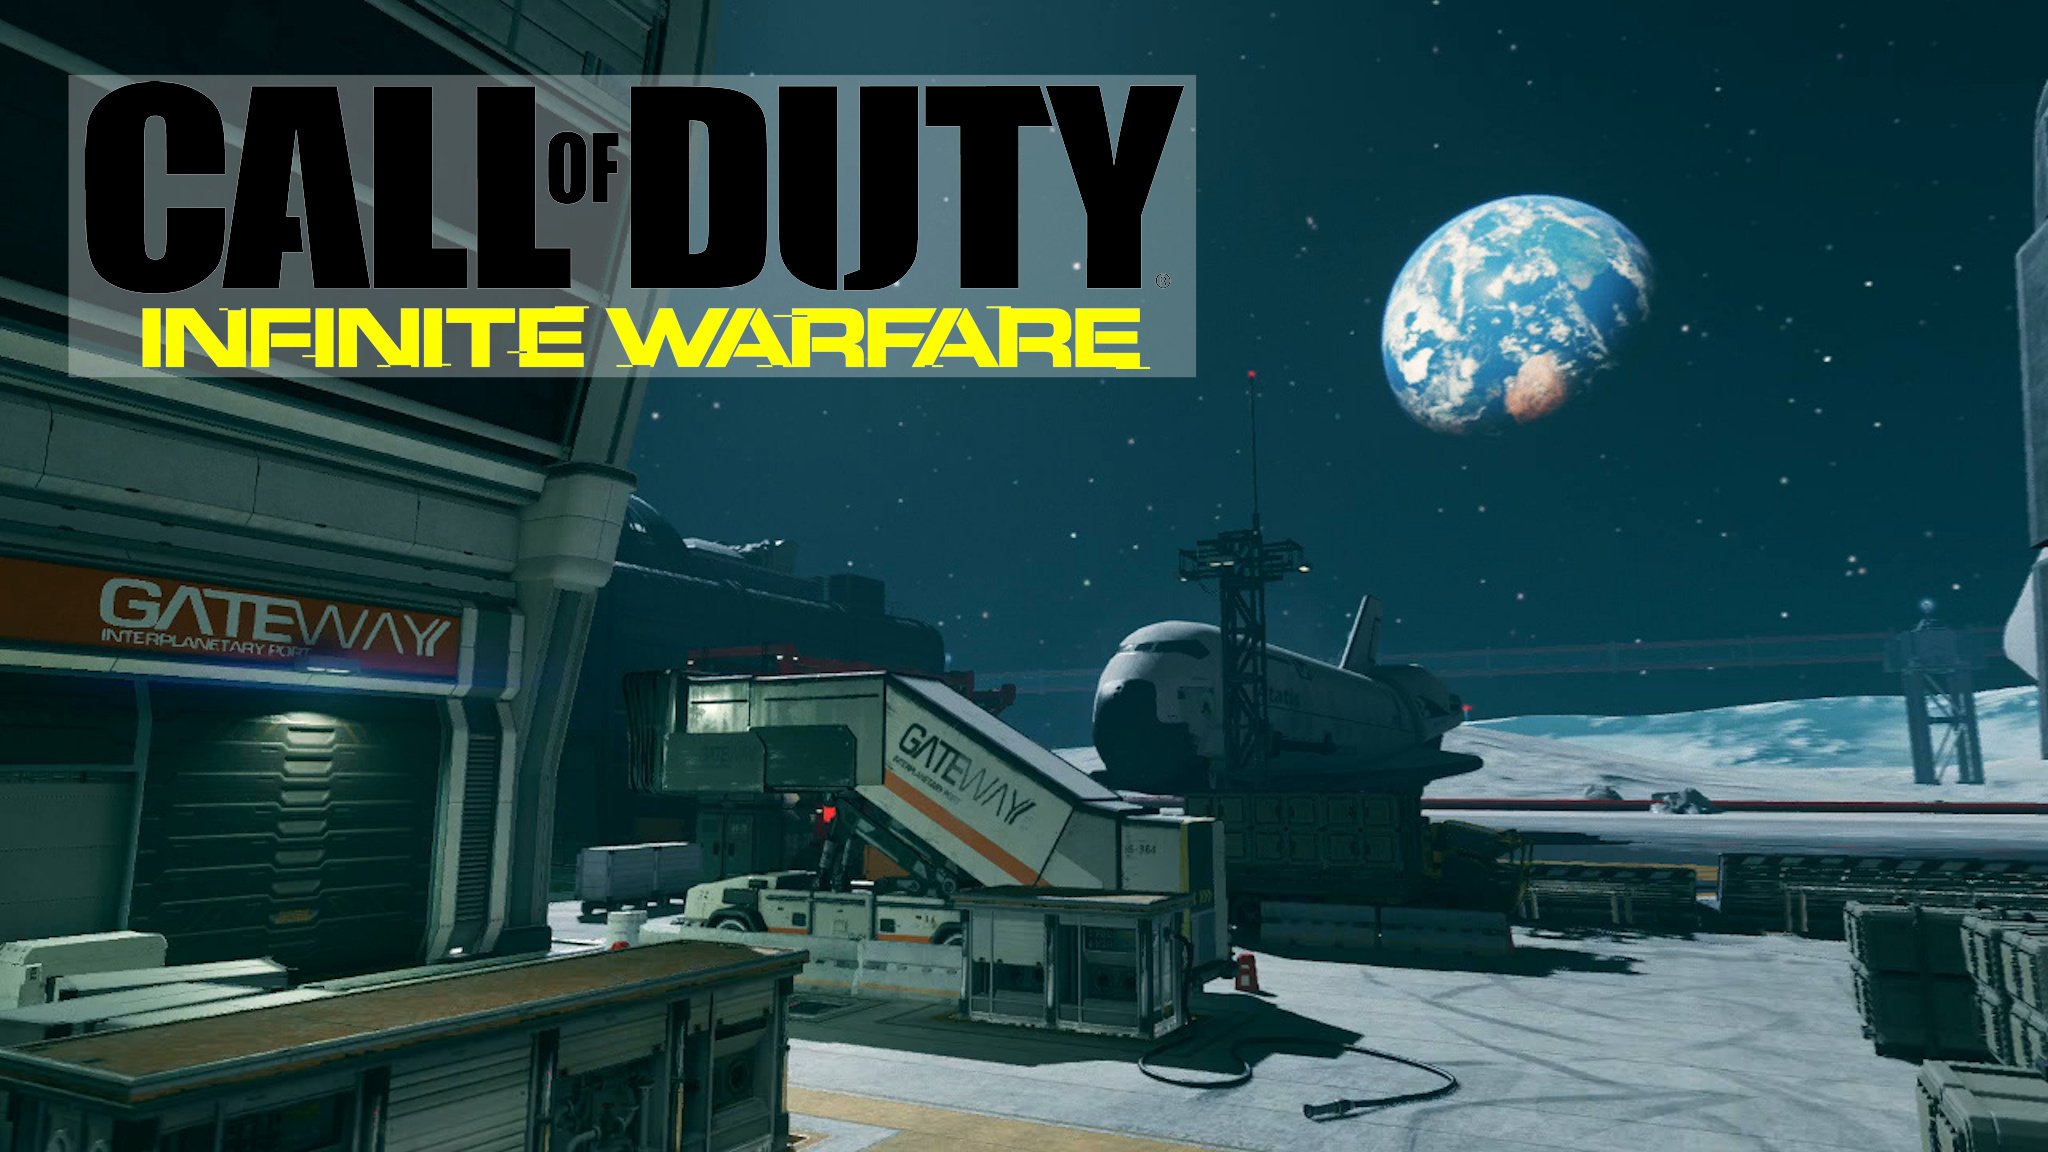 We played Call of Duty: Infinite Warfare multiplayer at Call of Duty XP